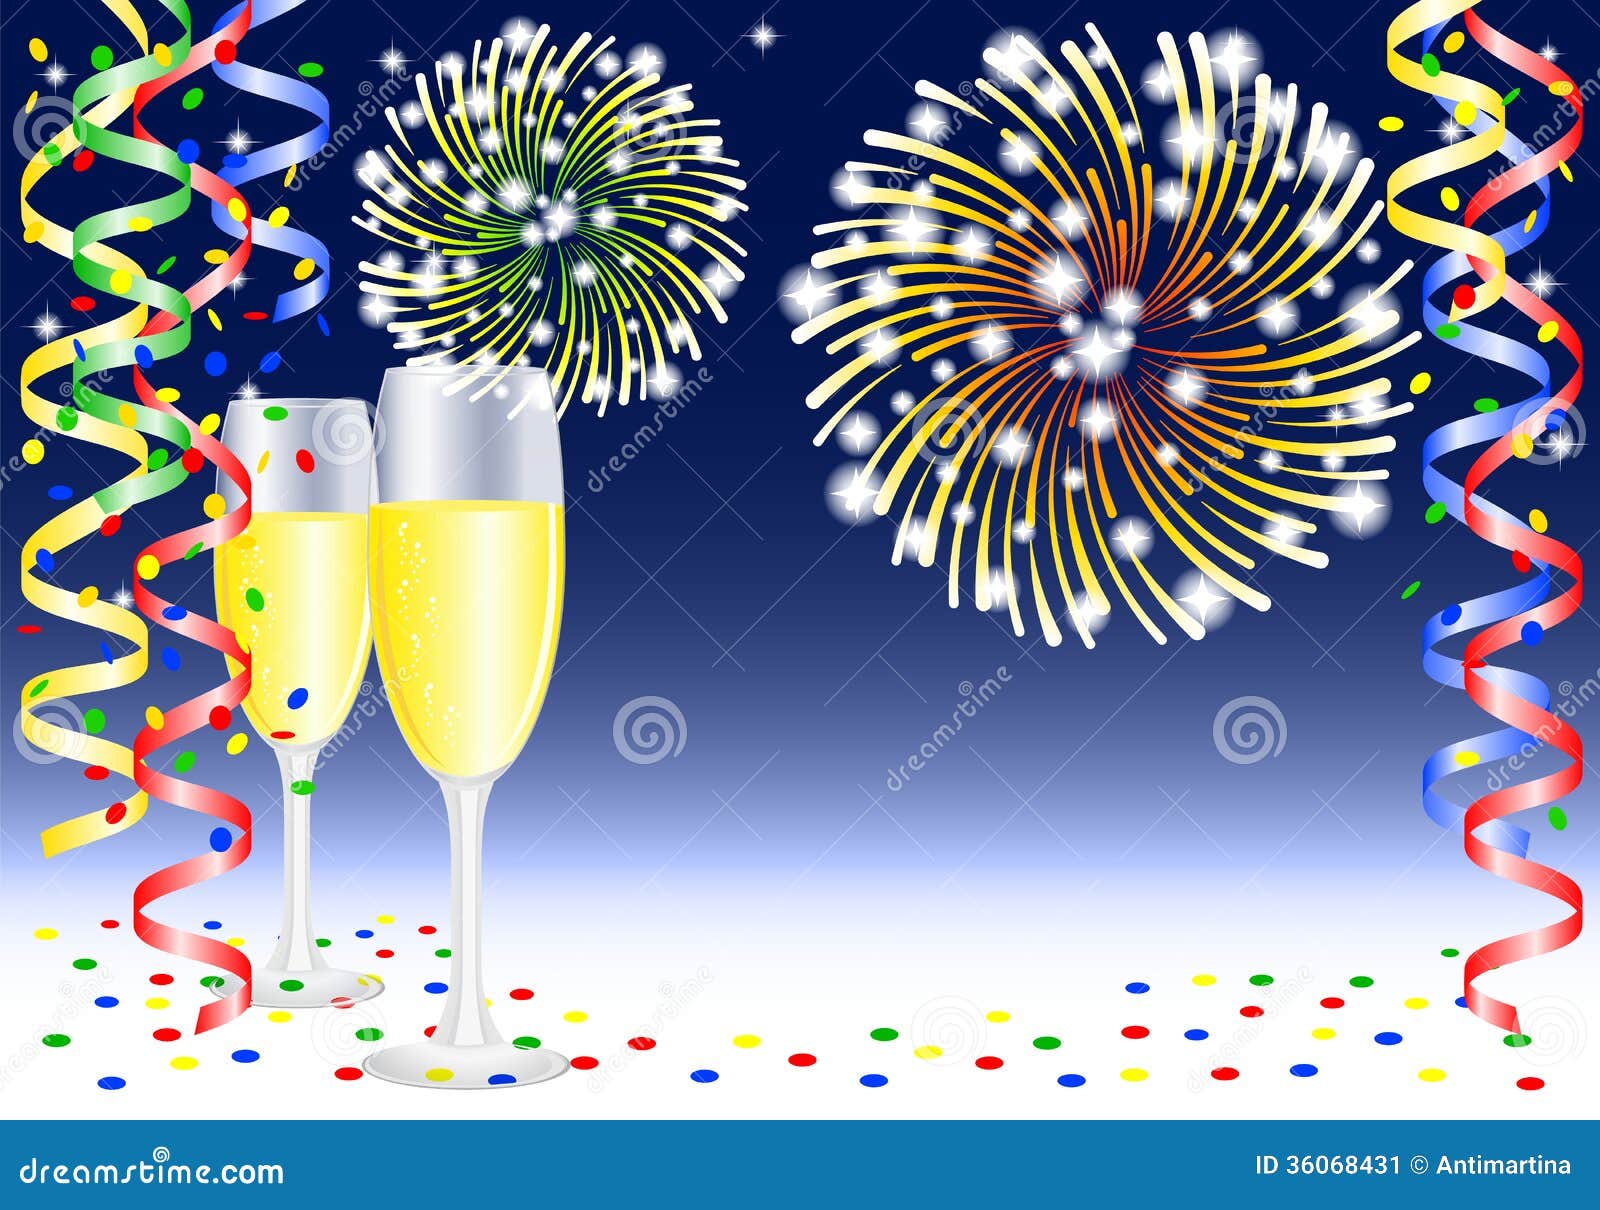 New year party background stock vector. Illustration of card - 36068431